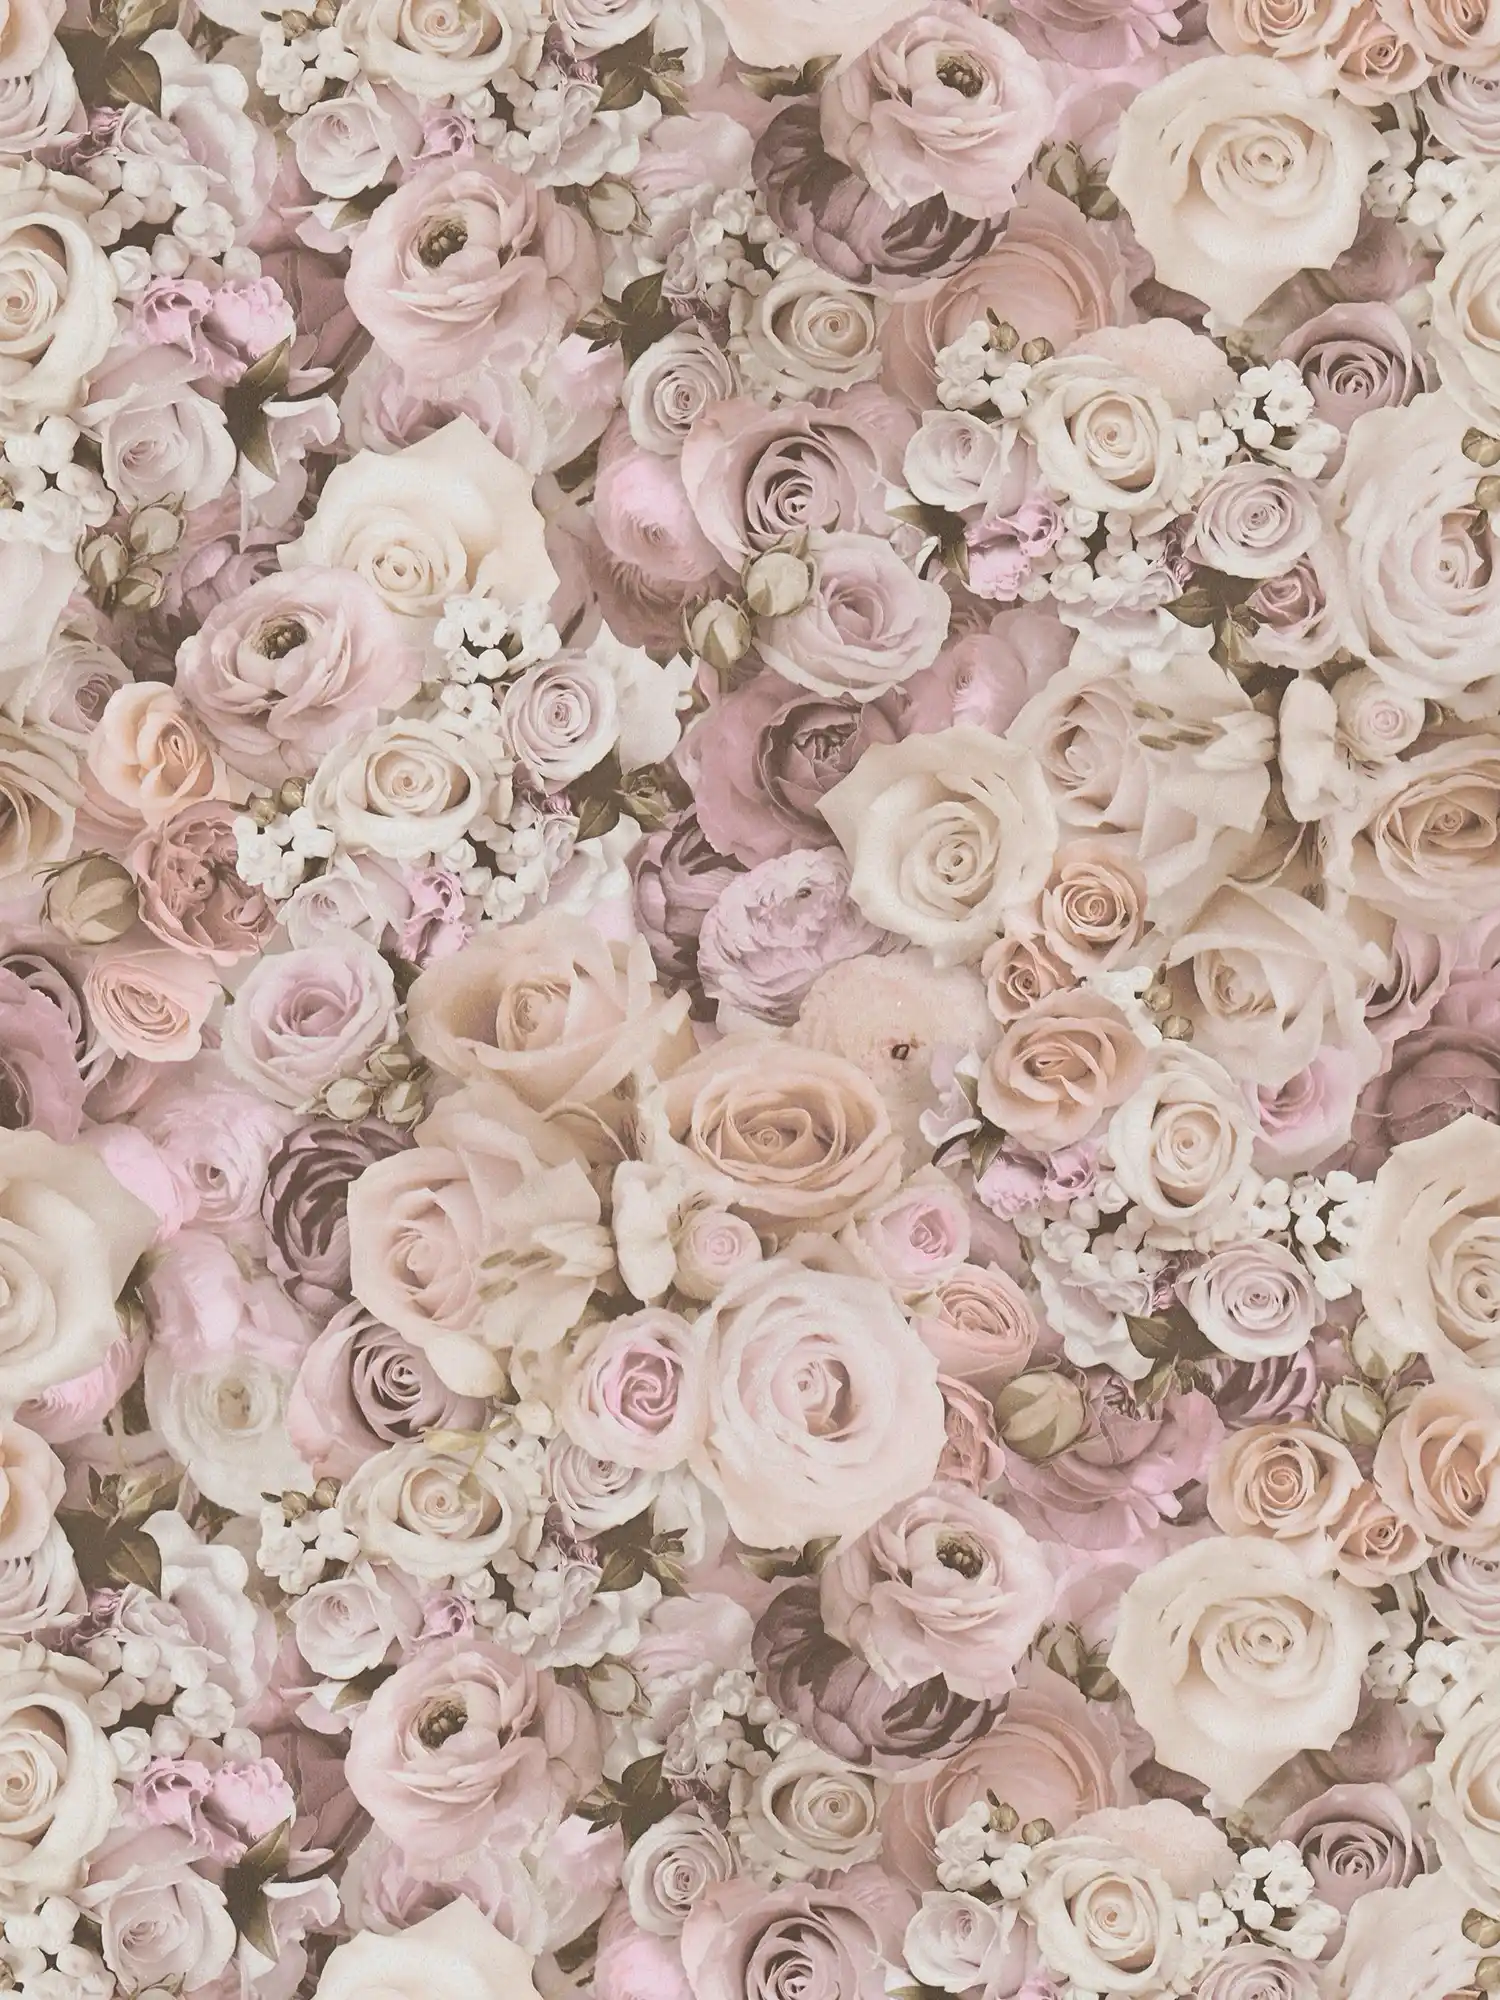 Self-adhesive wallpaper | floral pattern with roses - pink, cream
